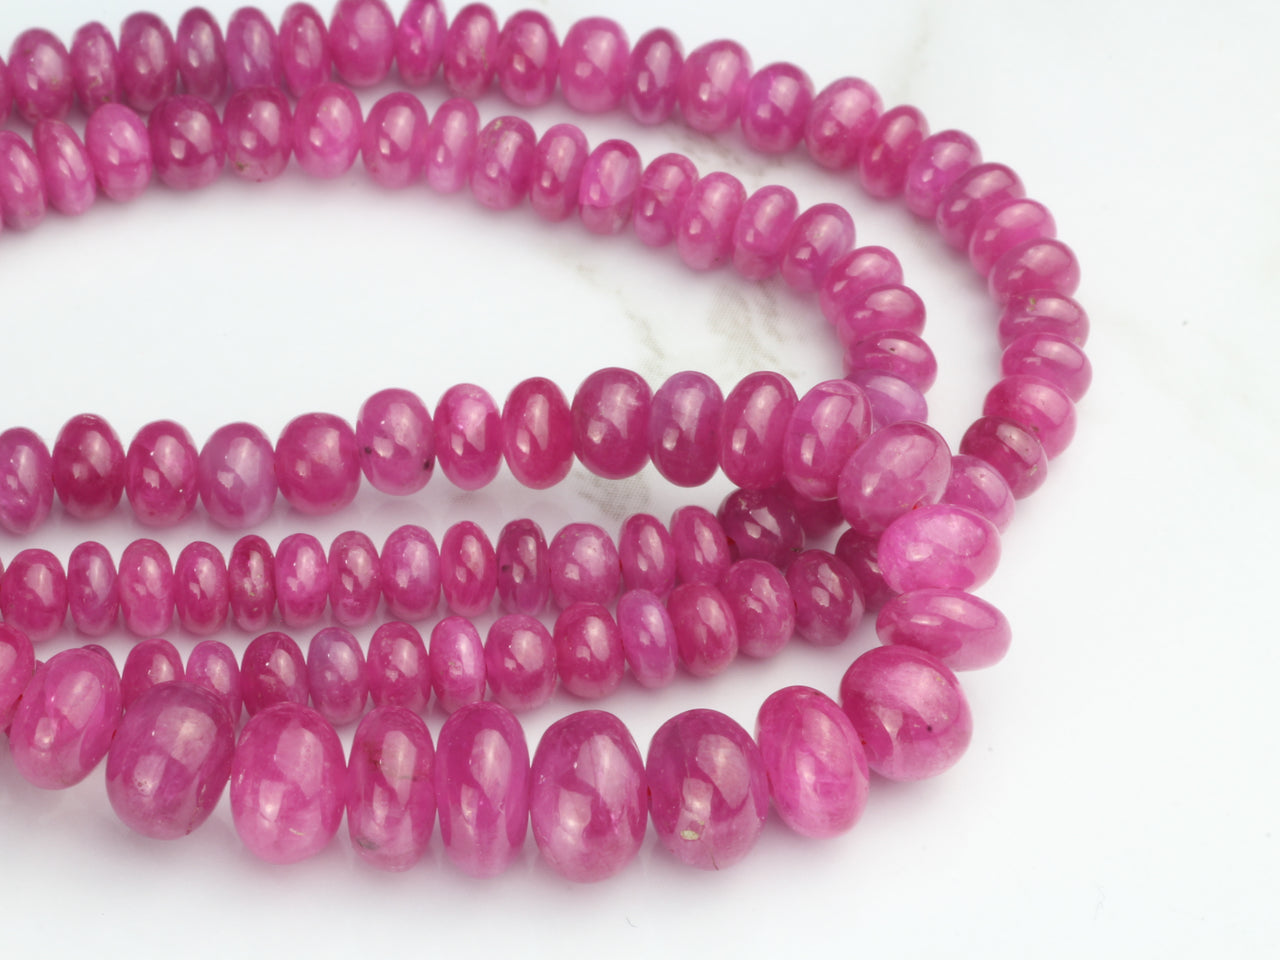 Pink Sapphire 4mm - 7mm Smooth Rondelles Bead Strand